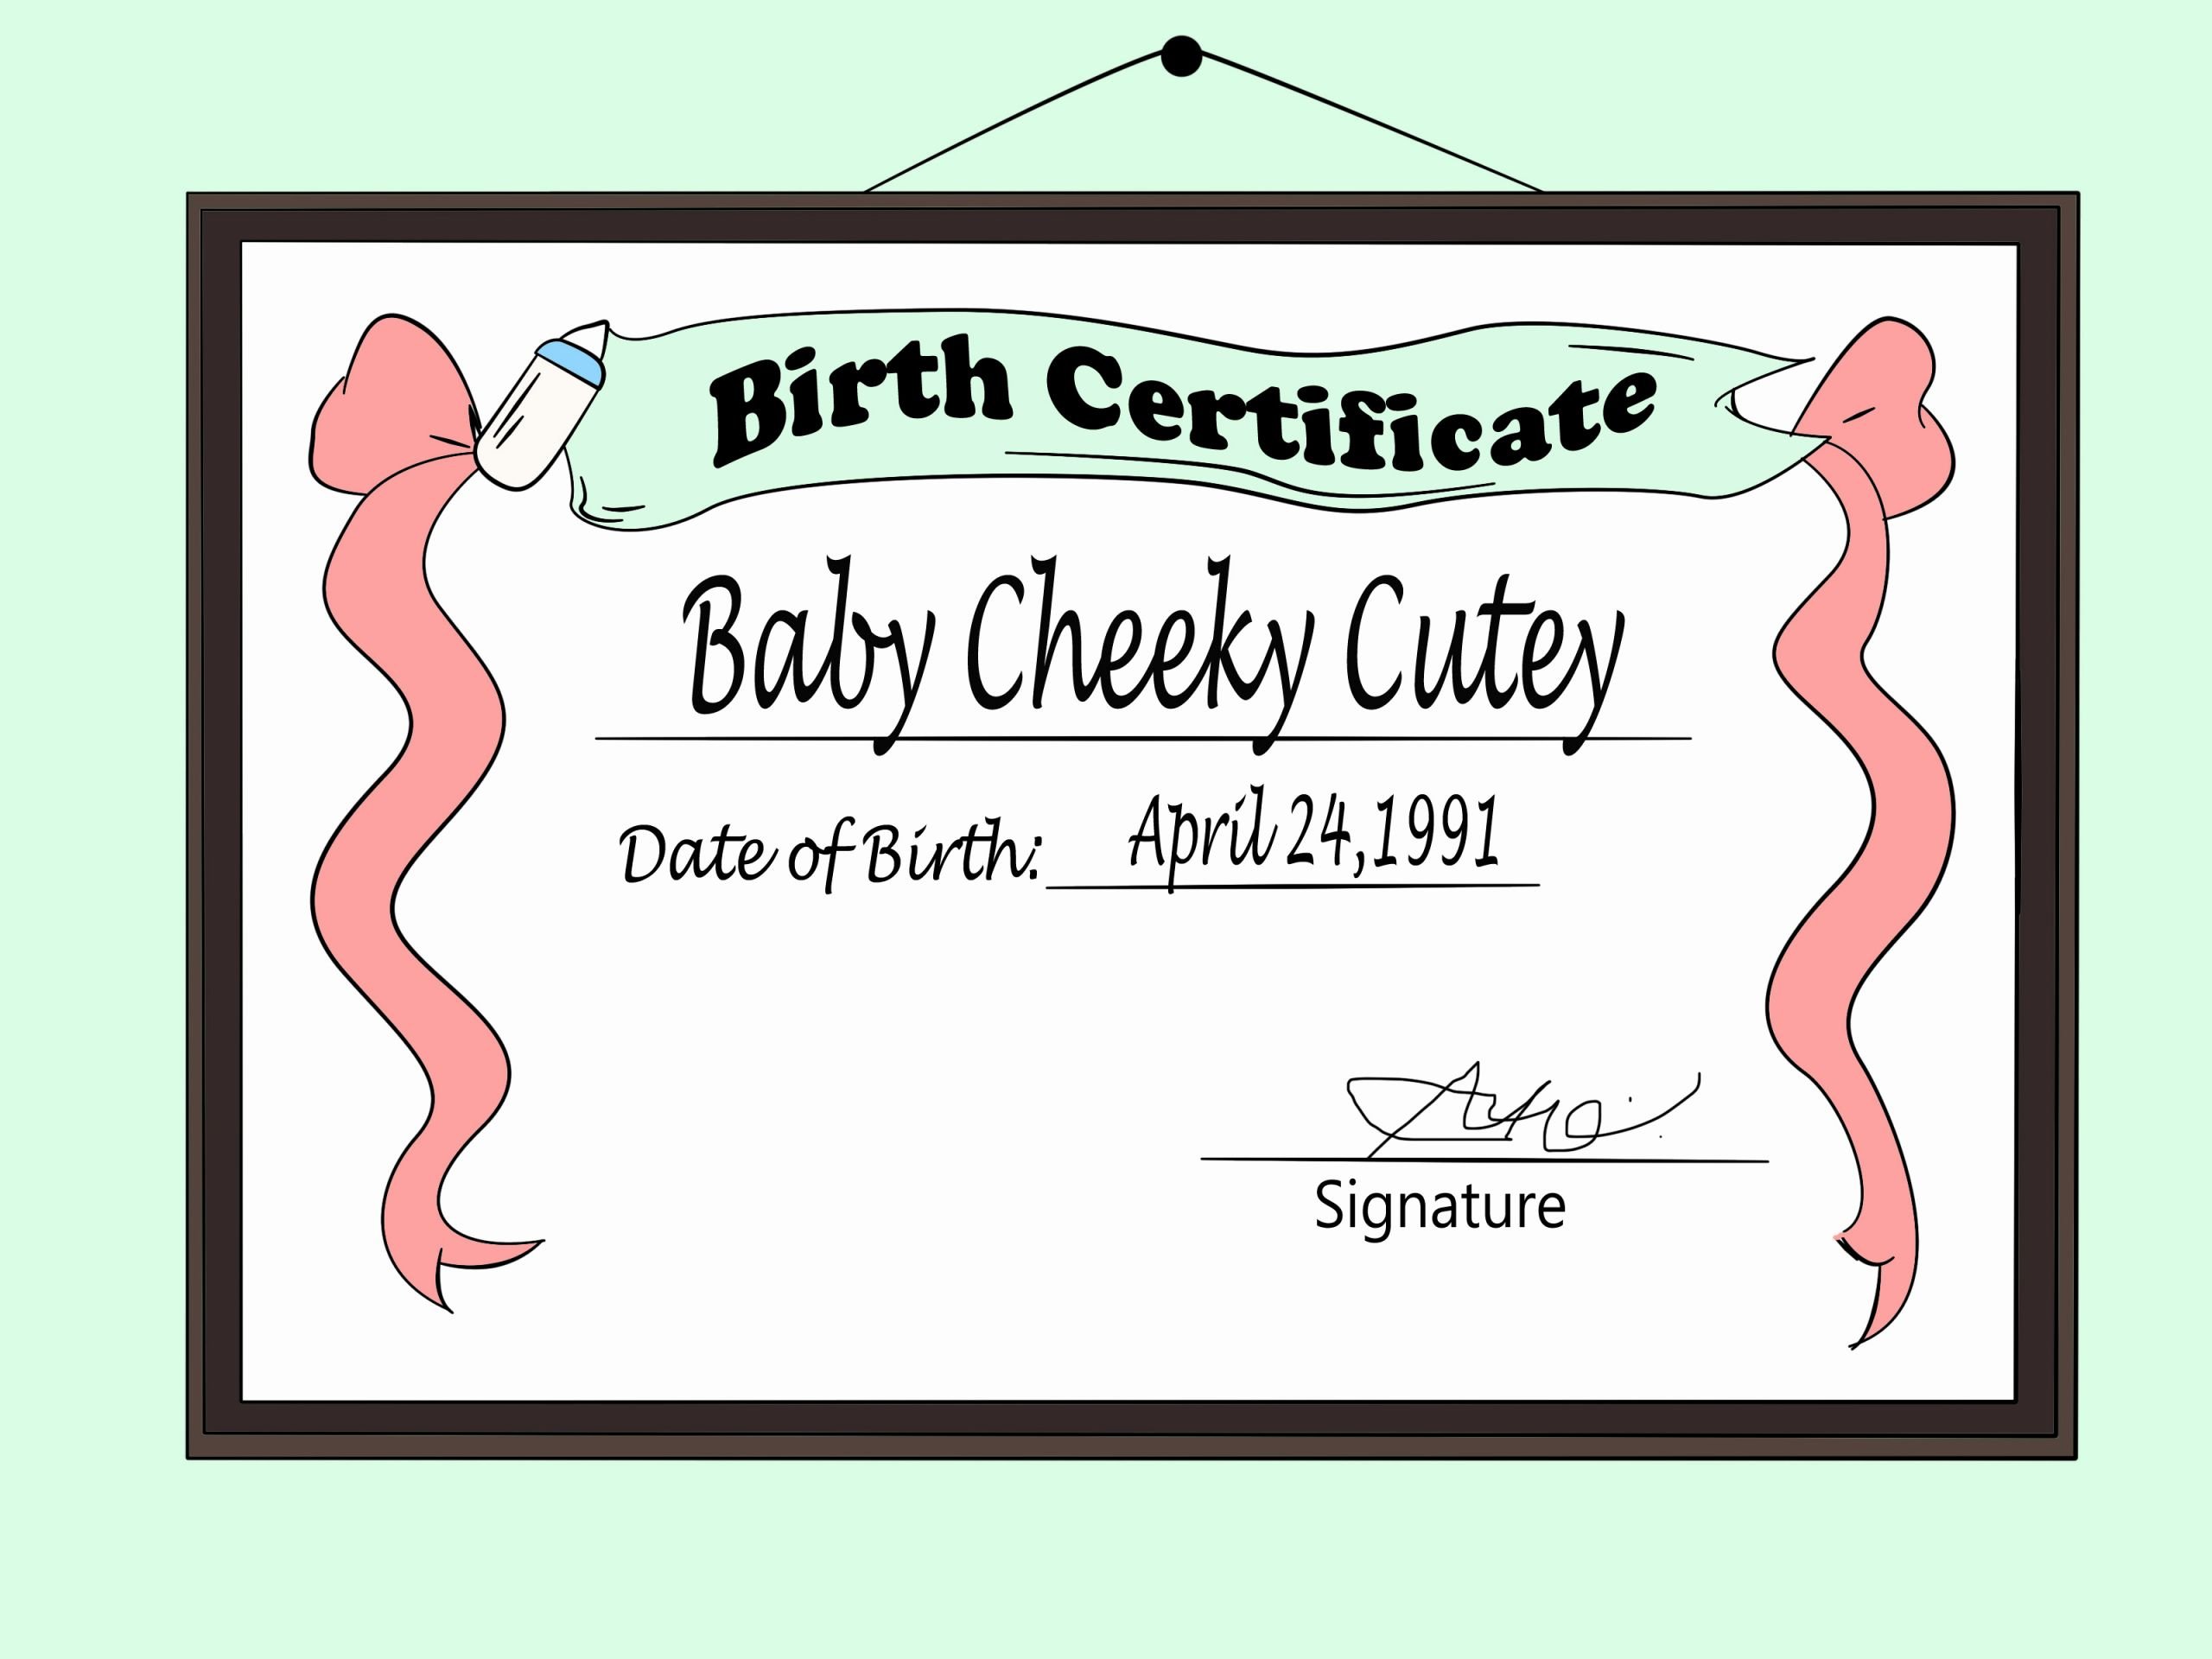 Baby Death Certificate Template Unique Certificate Design Gallery Category Page 2